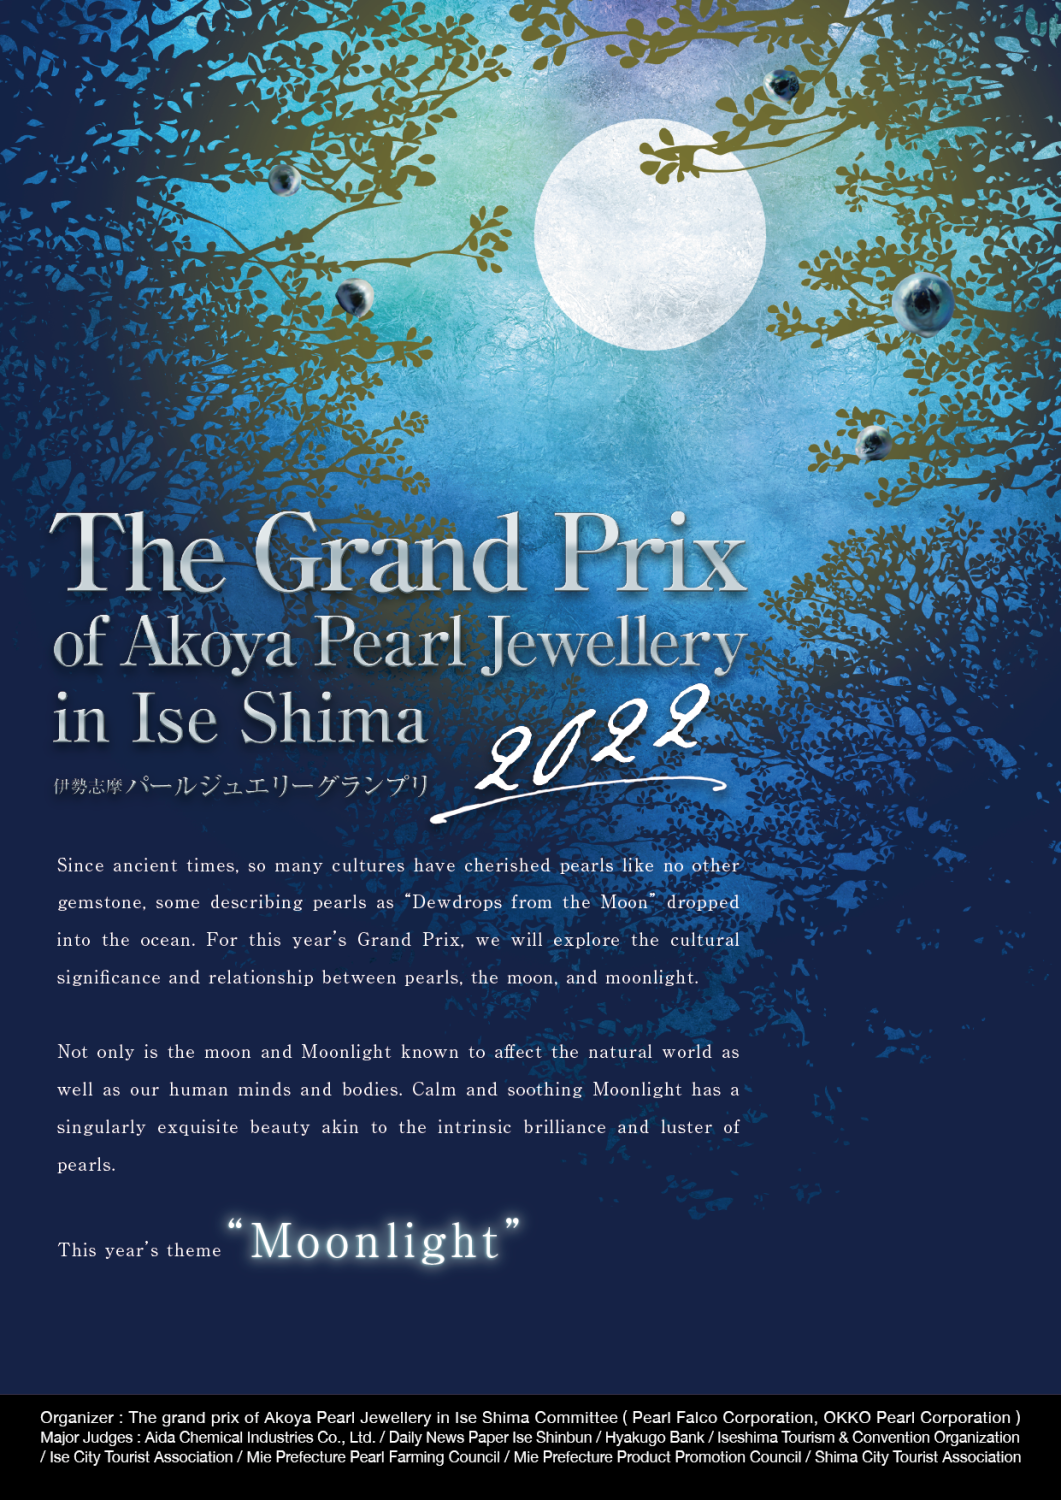 Ise-Shima Pearl Jewelry Grand Prix 2022 Starts with the theme of “Moonlight”!!